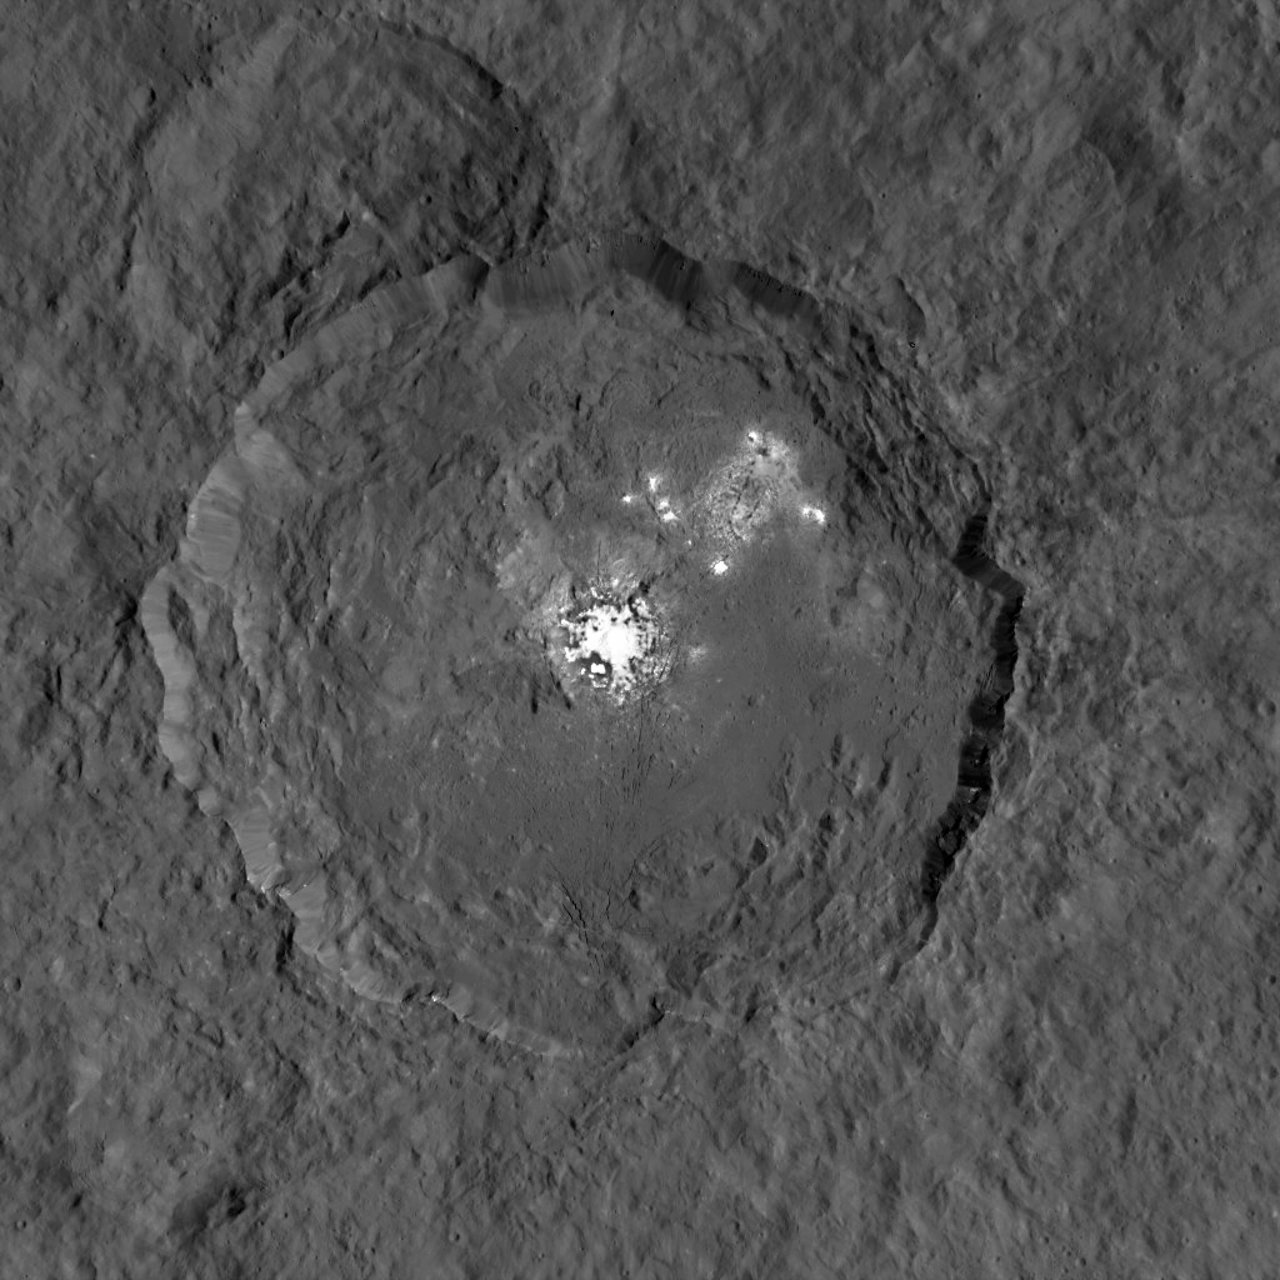 The bright spots on Ceres imaged by the Dawn spacecraft